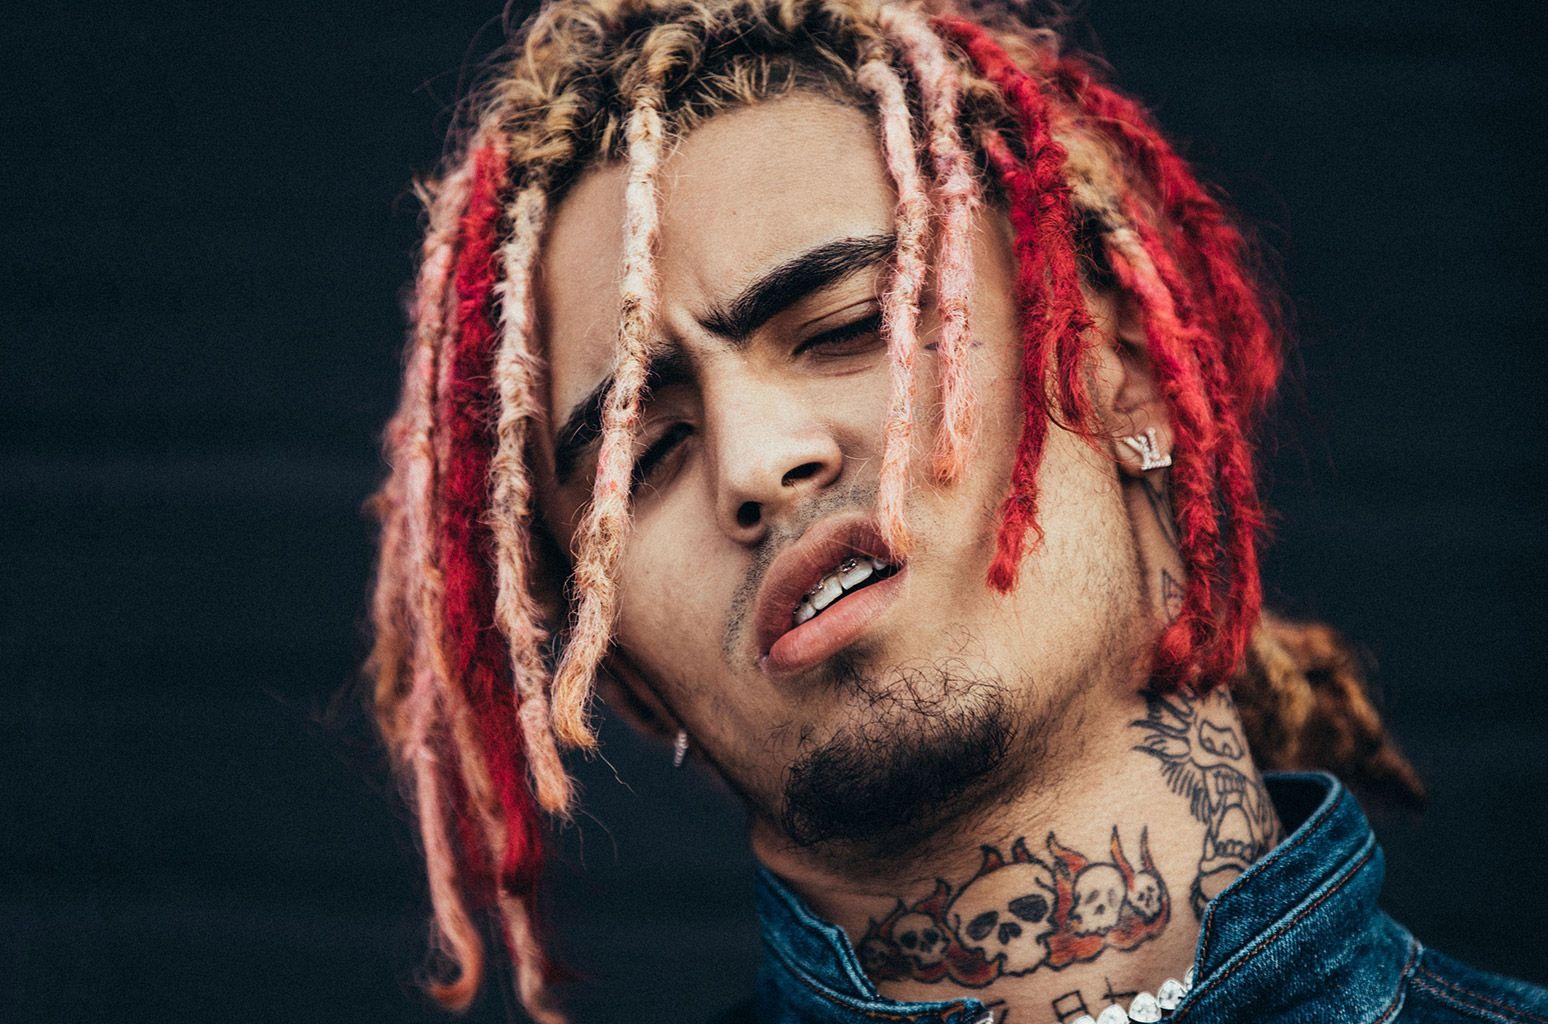 Lil Pump's 'Gucci Gang' Is Shortest Hot 100 by Length in 42